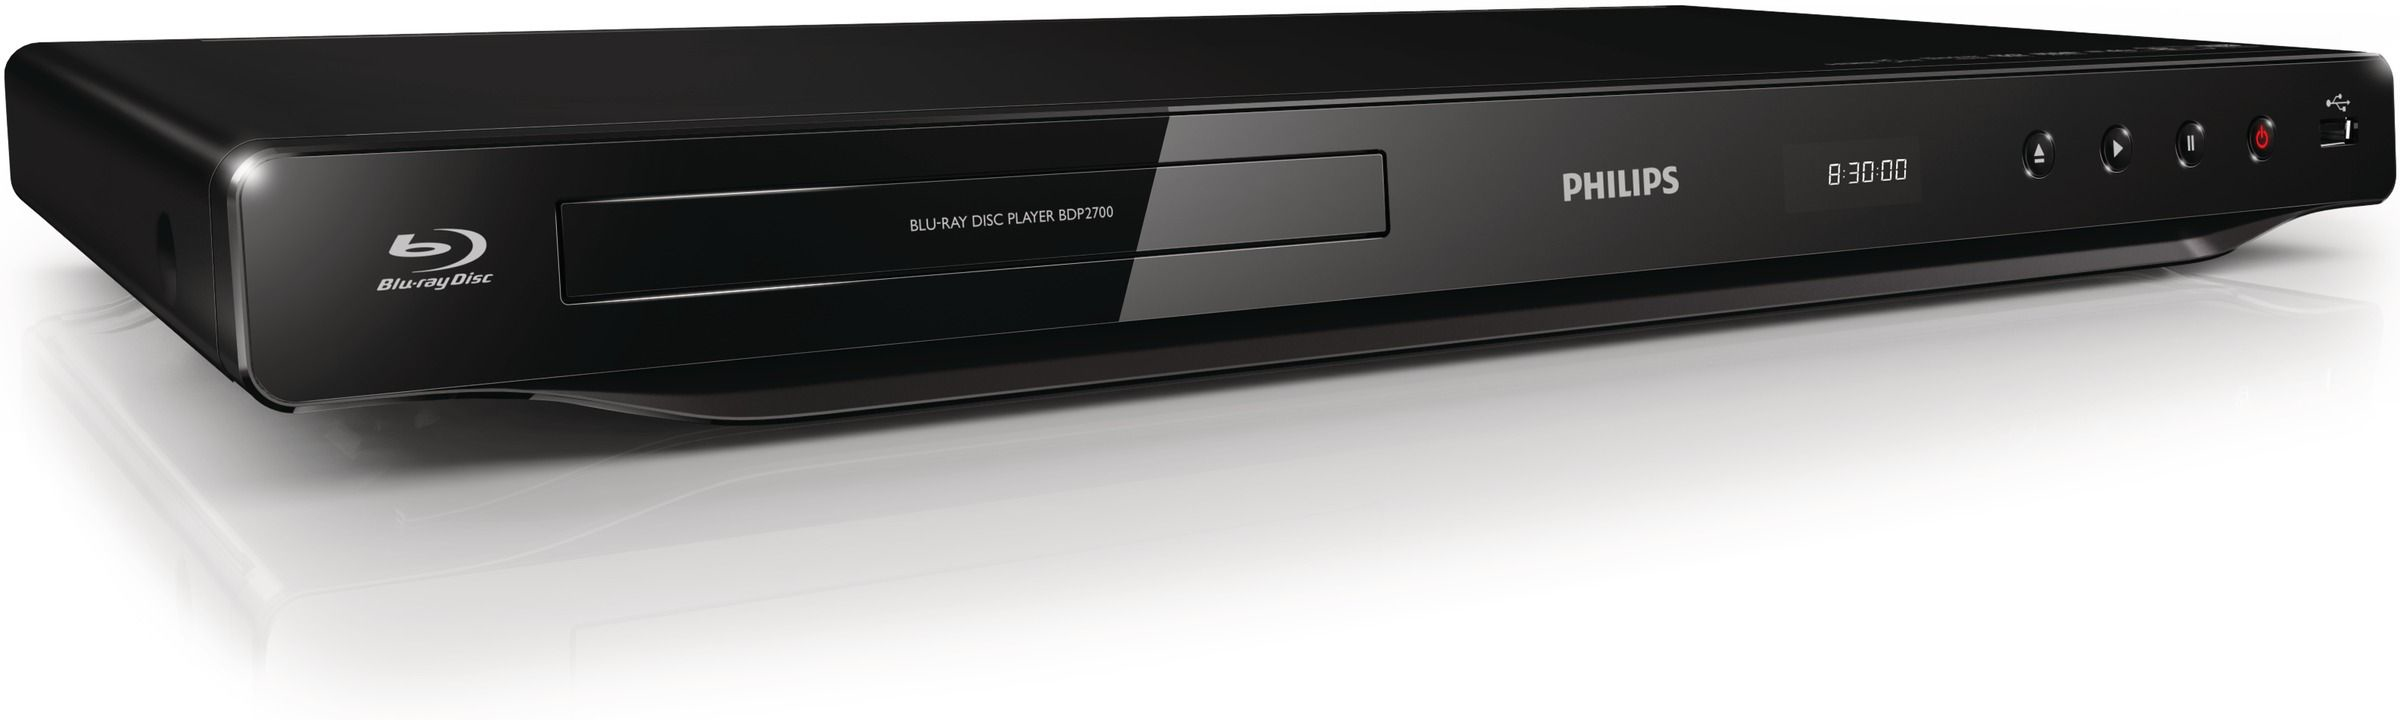 Sandals a billion offset Specs Philips 2000 series Blu-ray Disc player BDP2700/12 DVD/Blu-Ray Players  (BDP2700/12)